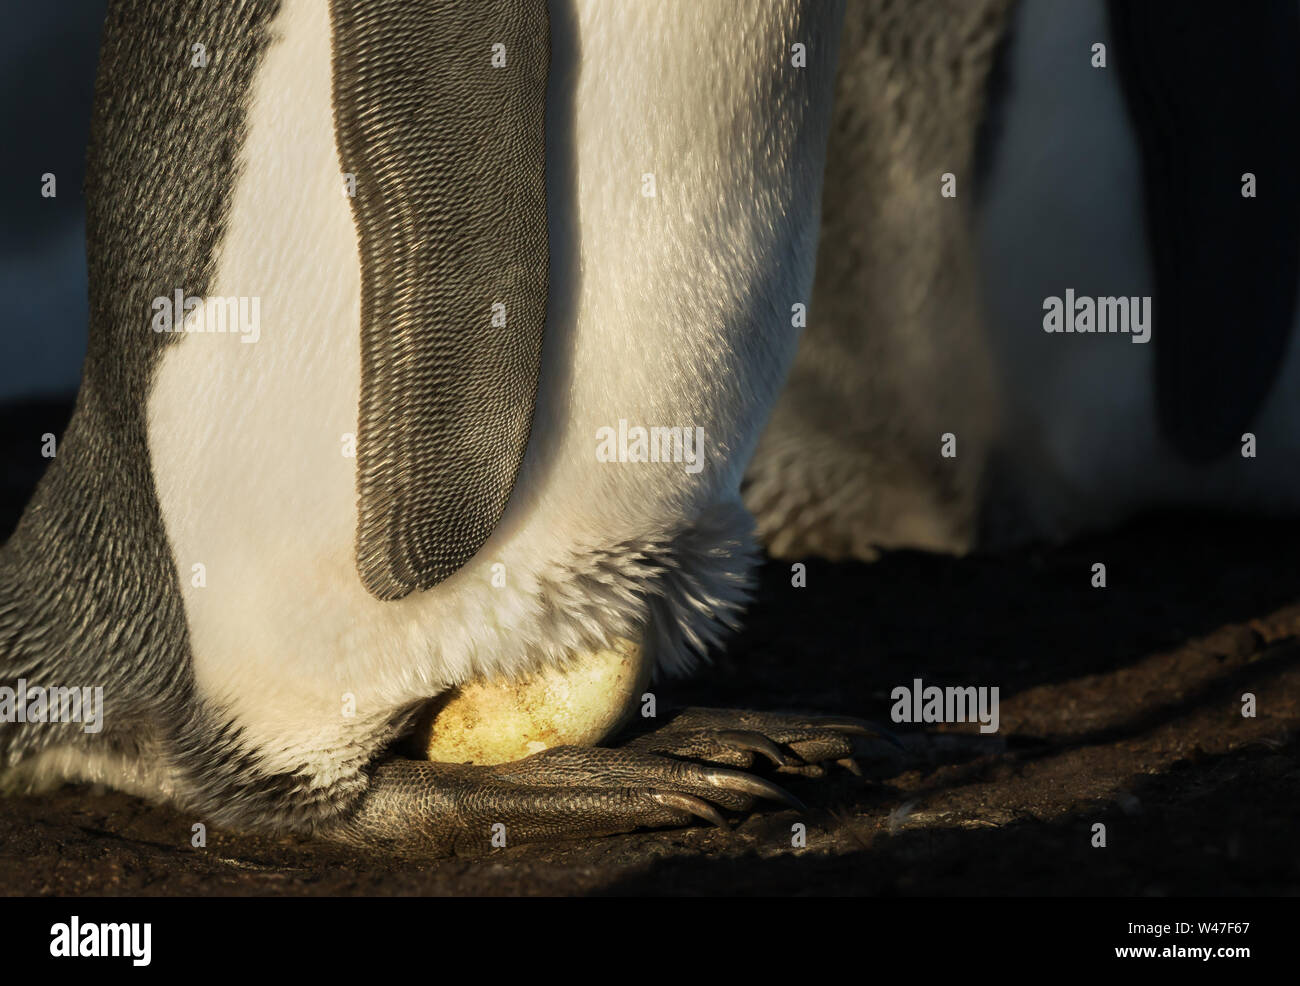 King penguin with an egg on feet waiting for it to hatch, Falkland Islands. Stock Photo